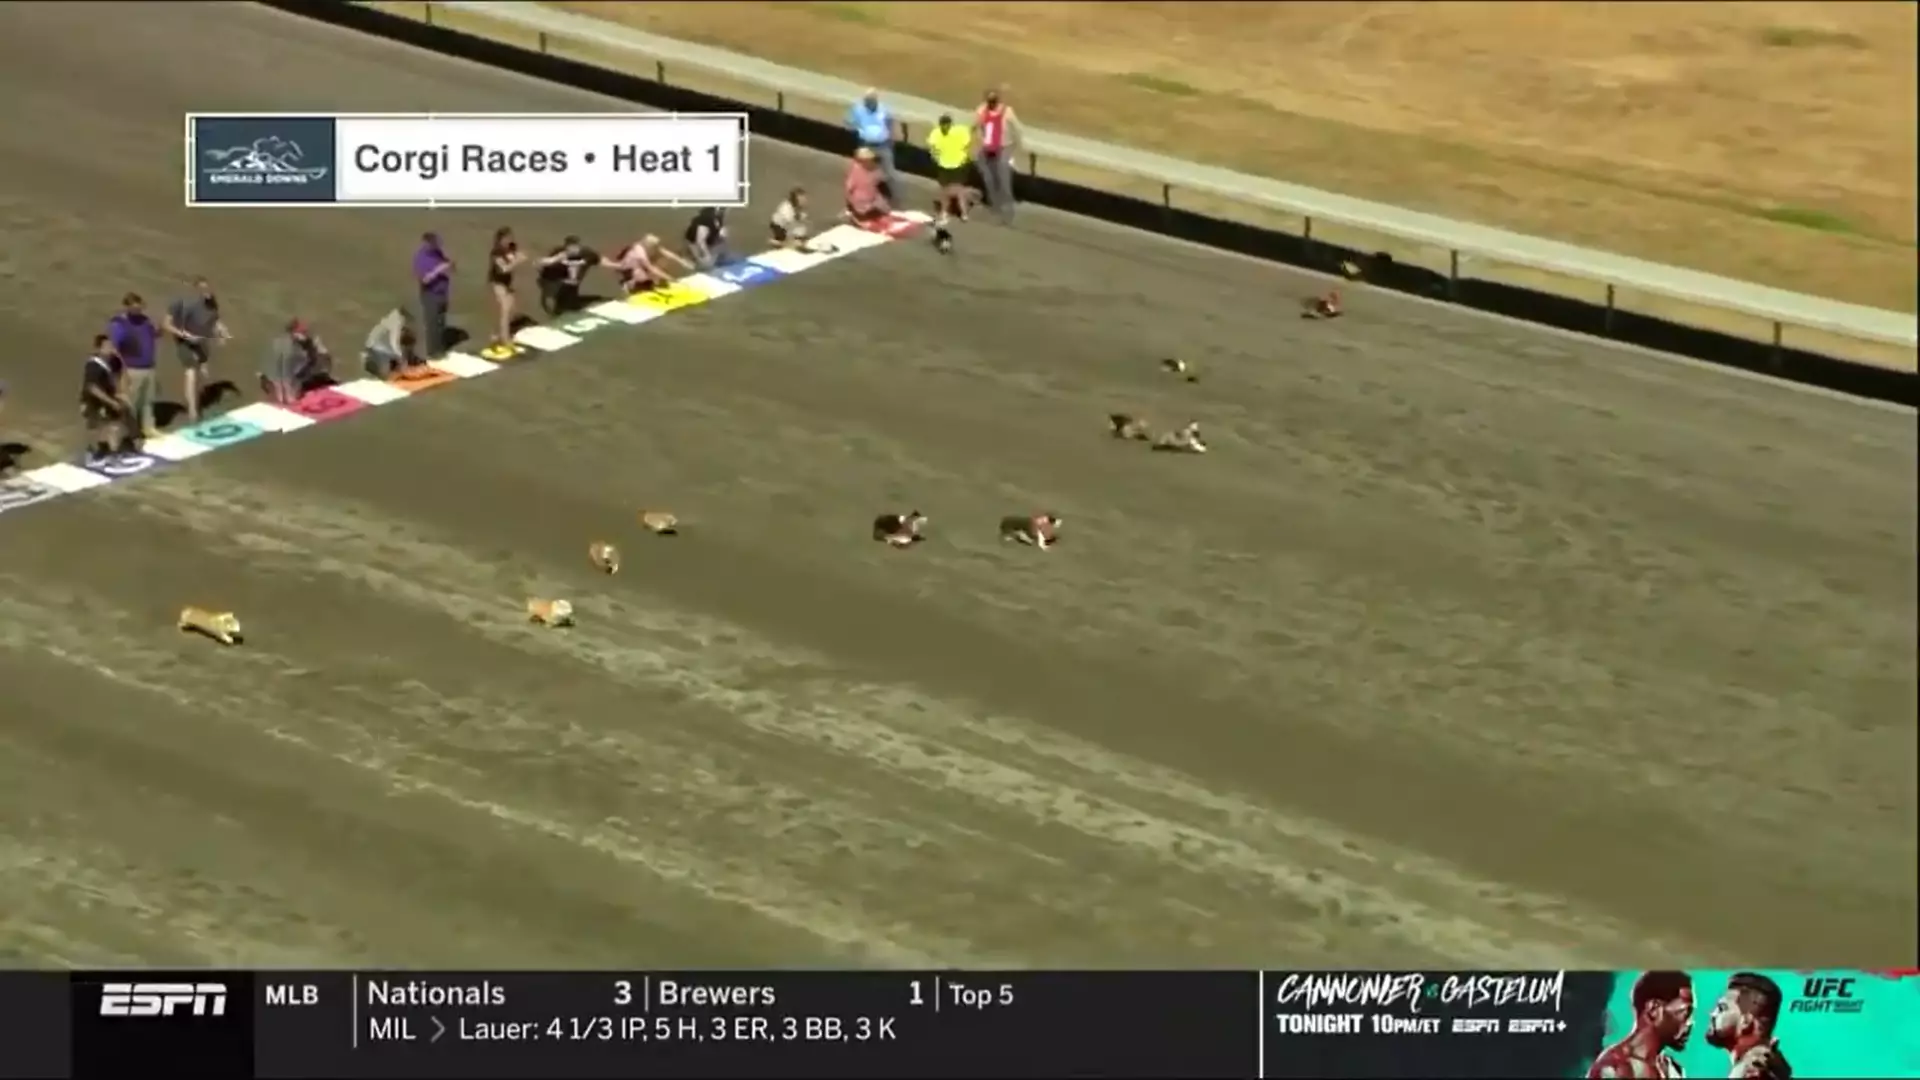 Viewers Baffled After ESPN Broadcasts Corgi Racing On Main Channel